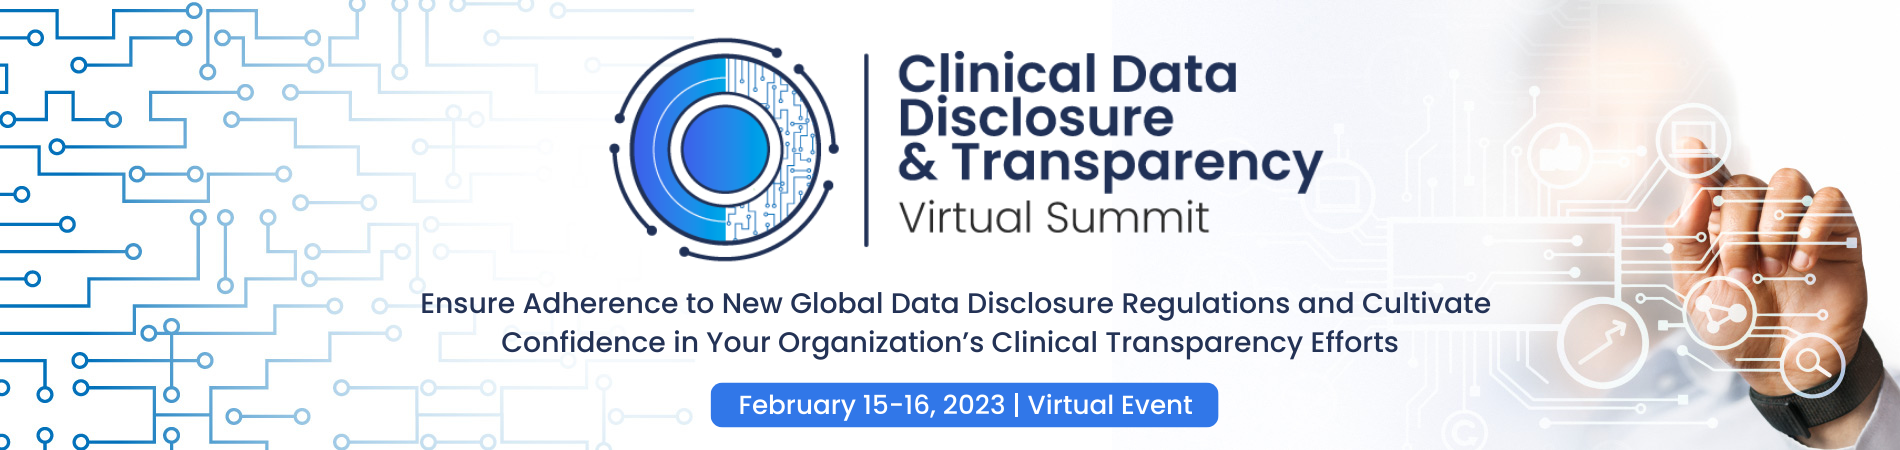 Banner of Clinical Data Disclosure & Transparency Virtual Summit, February 15-16, 2023